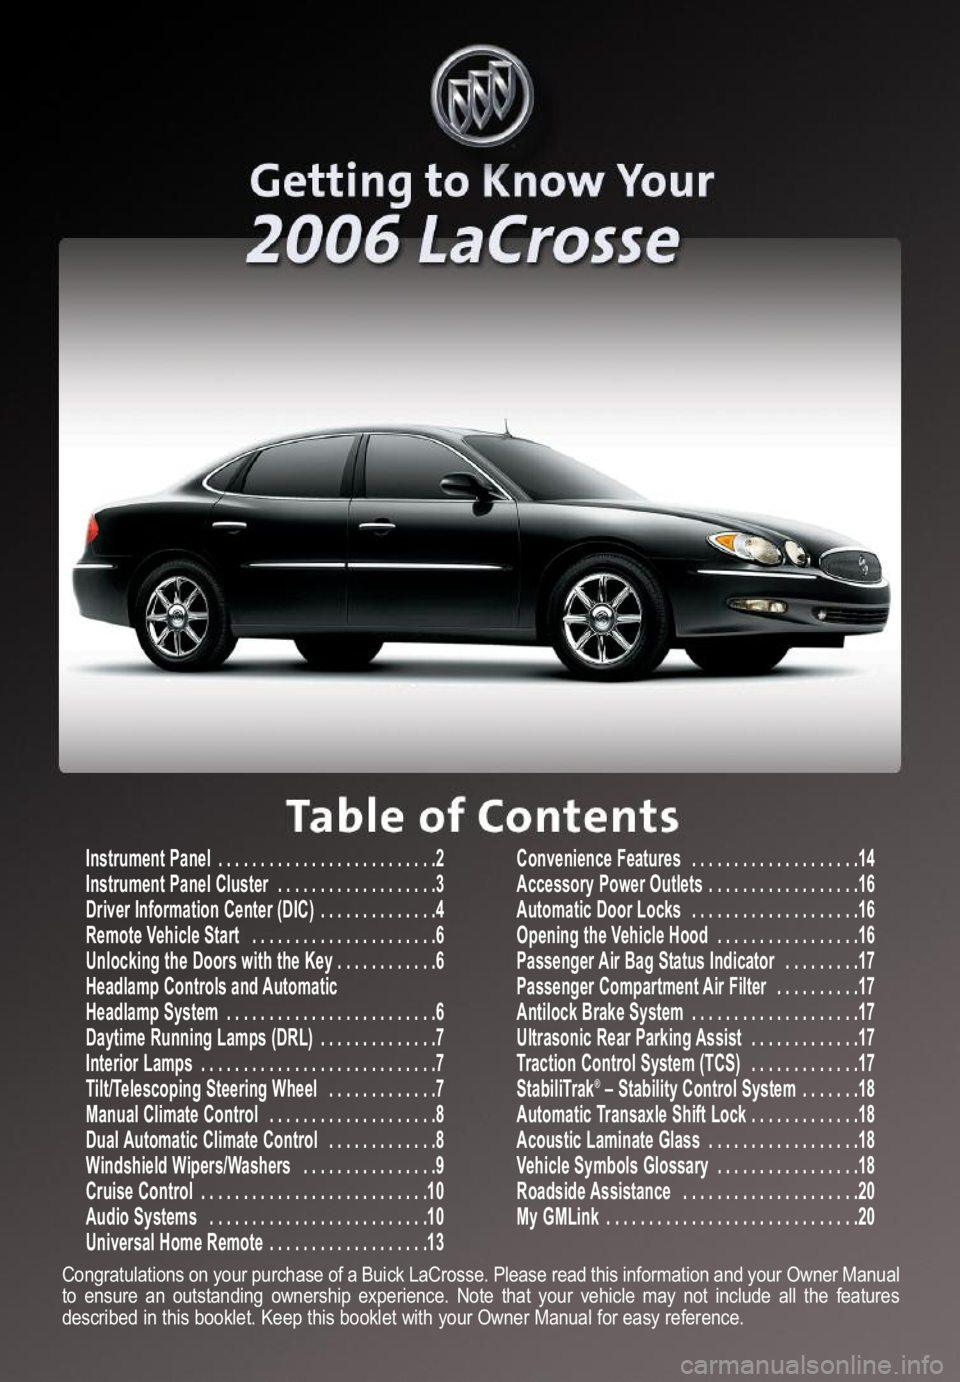 BUICK LACROSSE 2006  Get To Know Guide Instrument Panel  . . . . . . . . . . . . . . . . . . . . . . . . . .2
Instrument Panel Cluster  . . . . . . . . . . . . . . . . . . .3
Driver Information Center (DIC)  . . . . . . . . . . . . . .4
Re